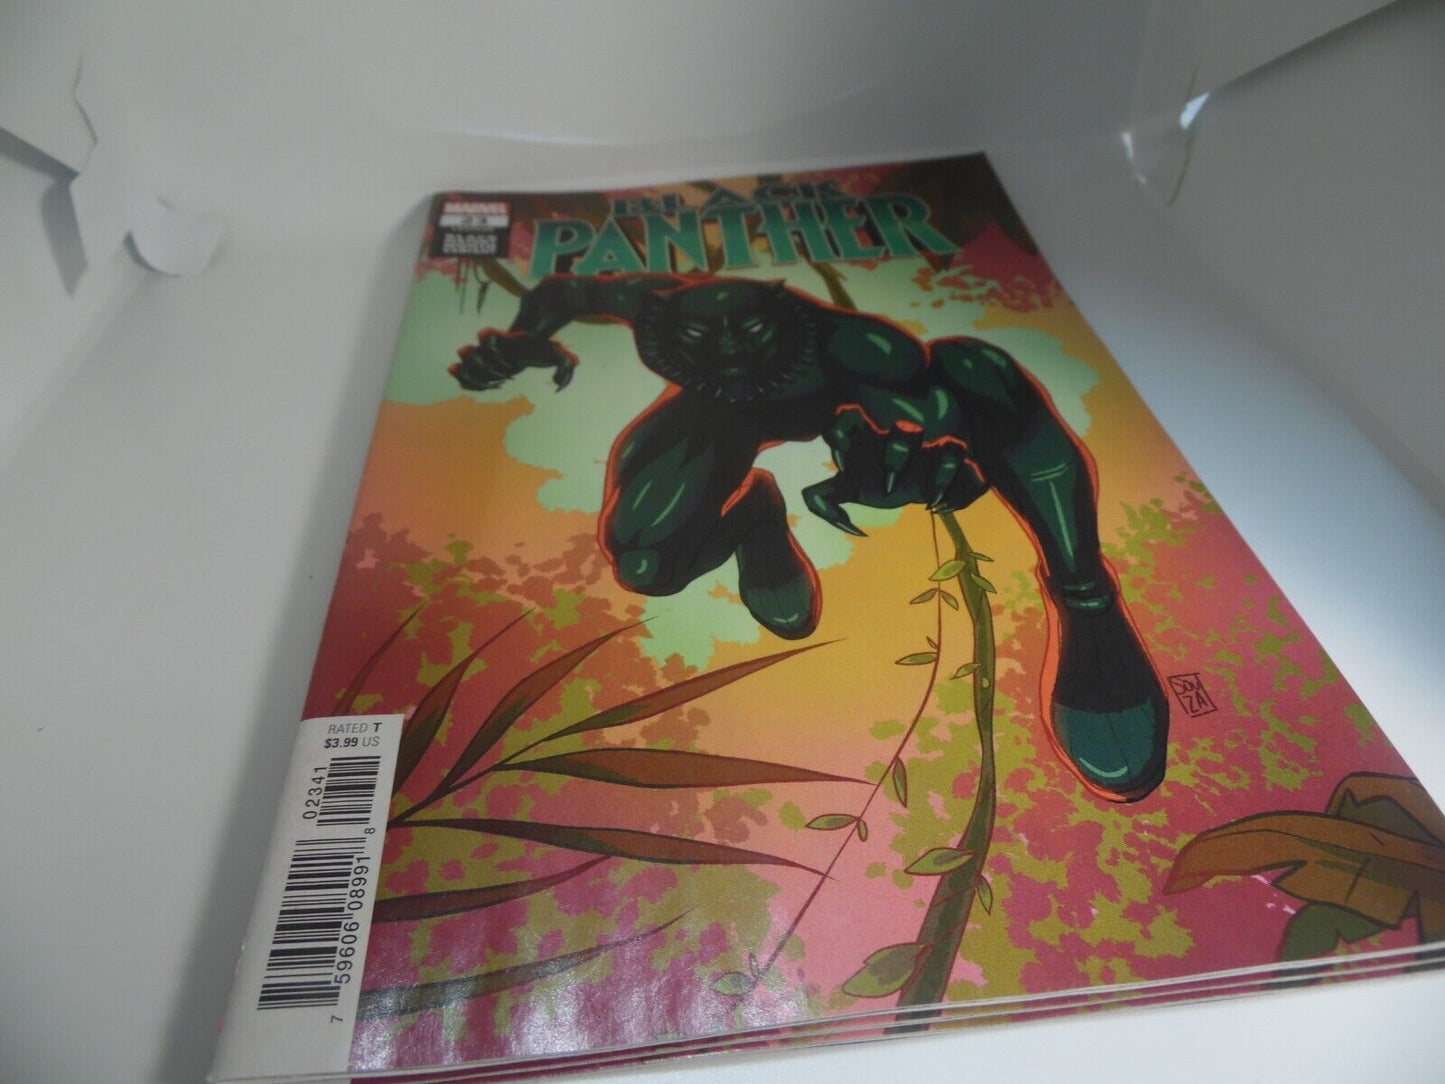 Black Panther #23 THE POWER OF THE NAMELESS Variant Marvel 2021